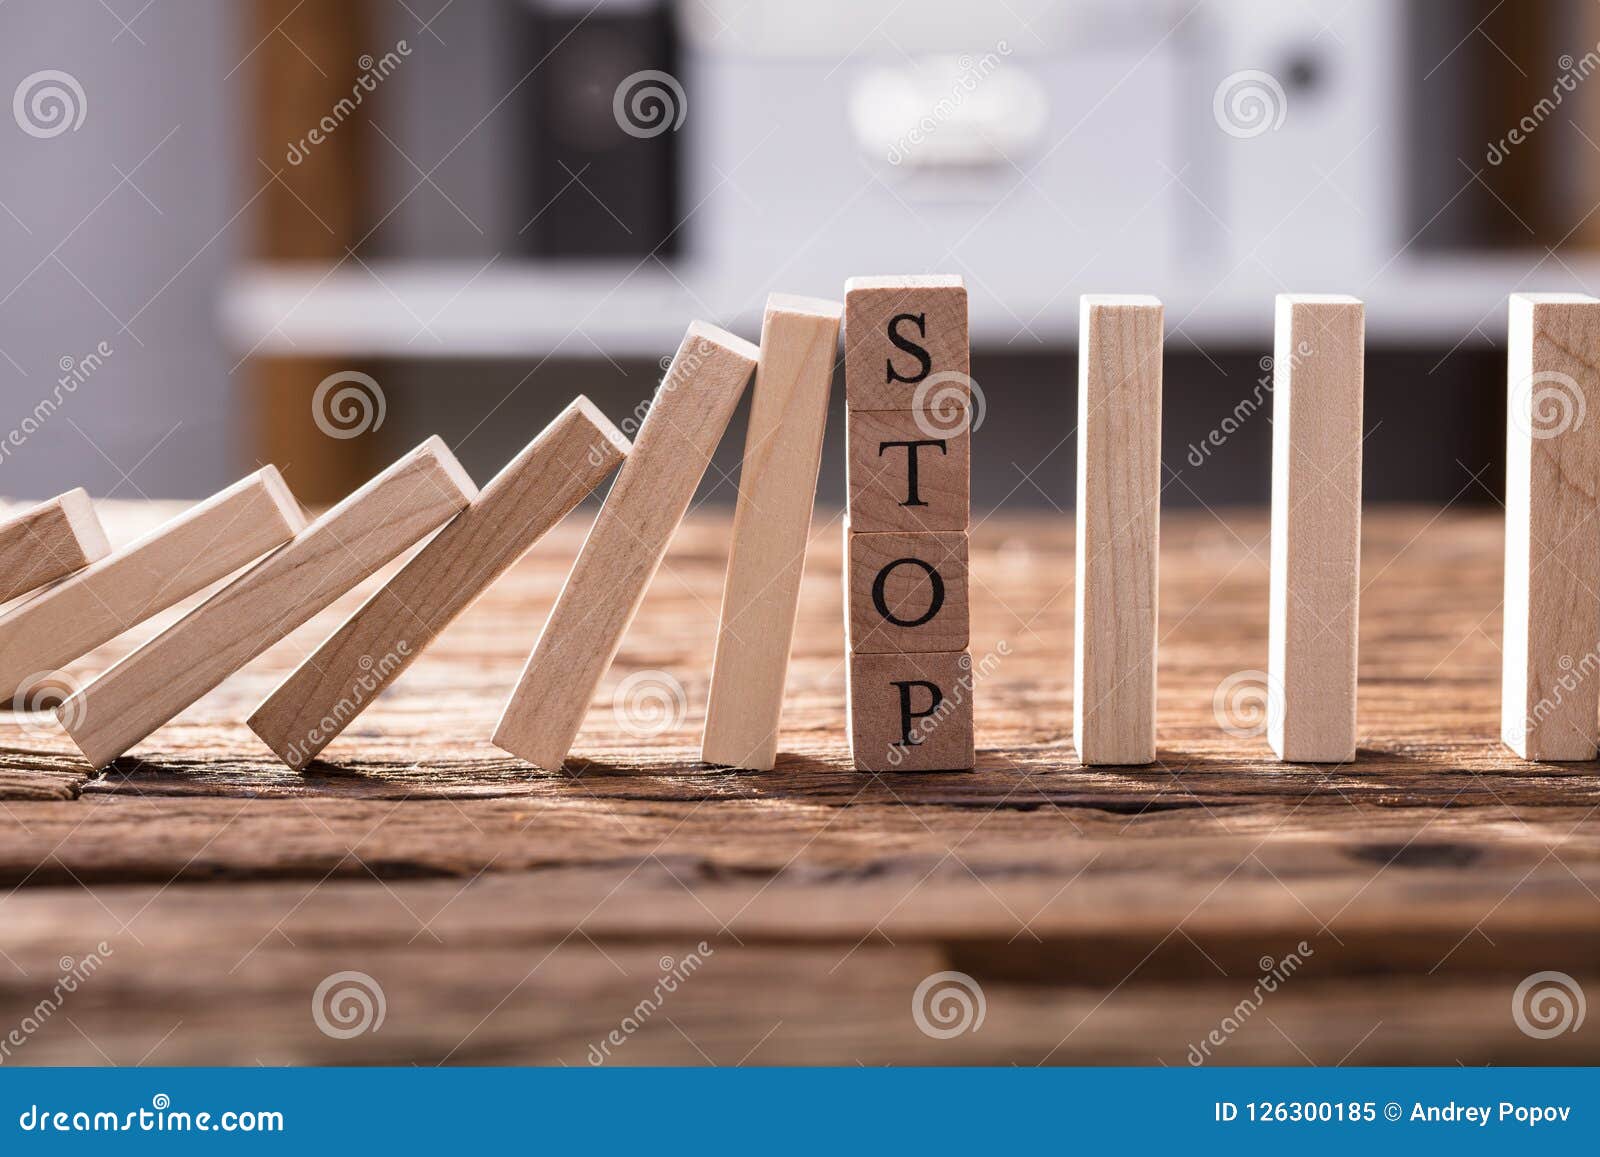 falling dominos stopped by wooden blocks showing stop text